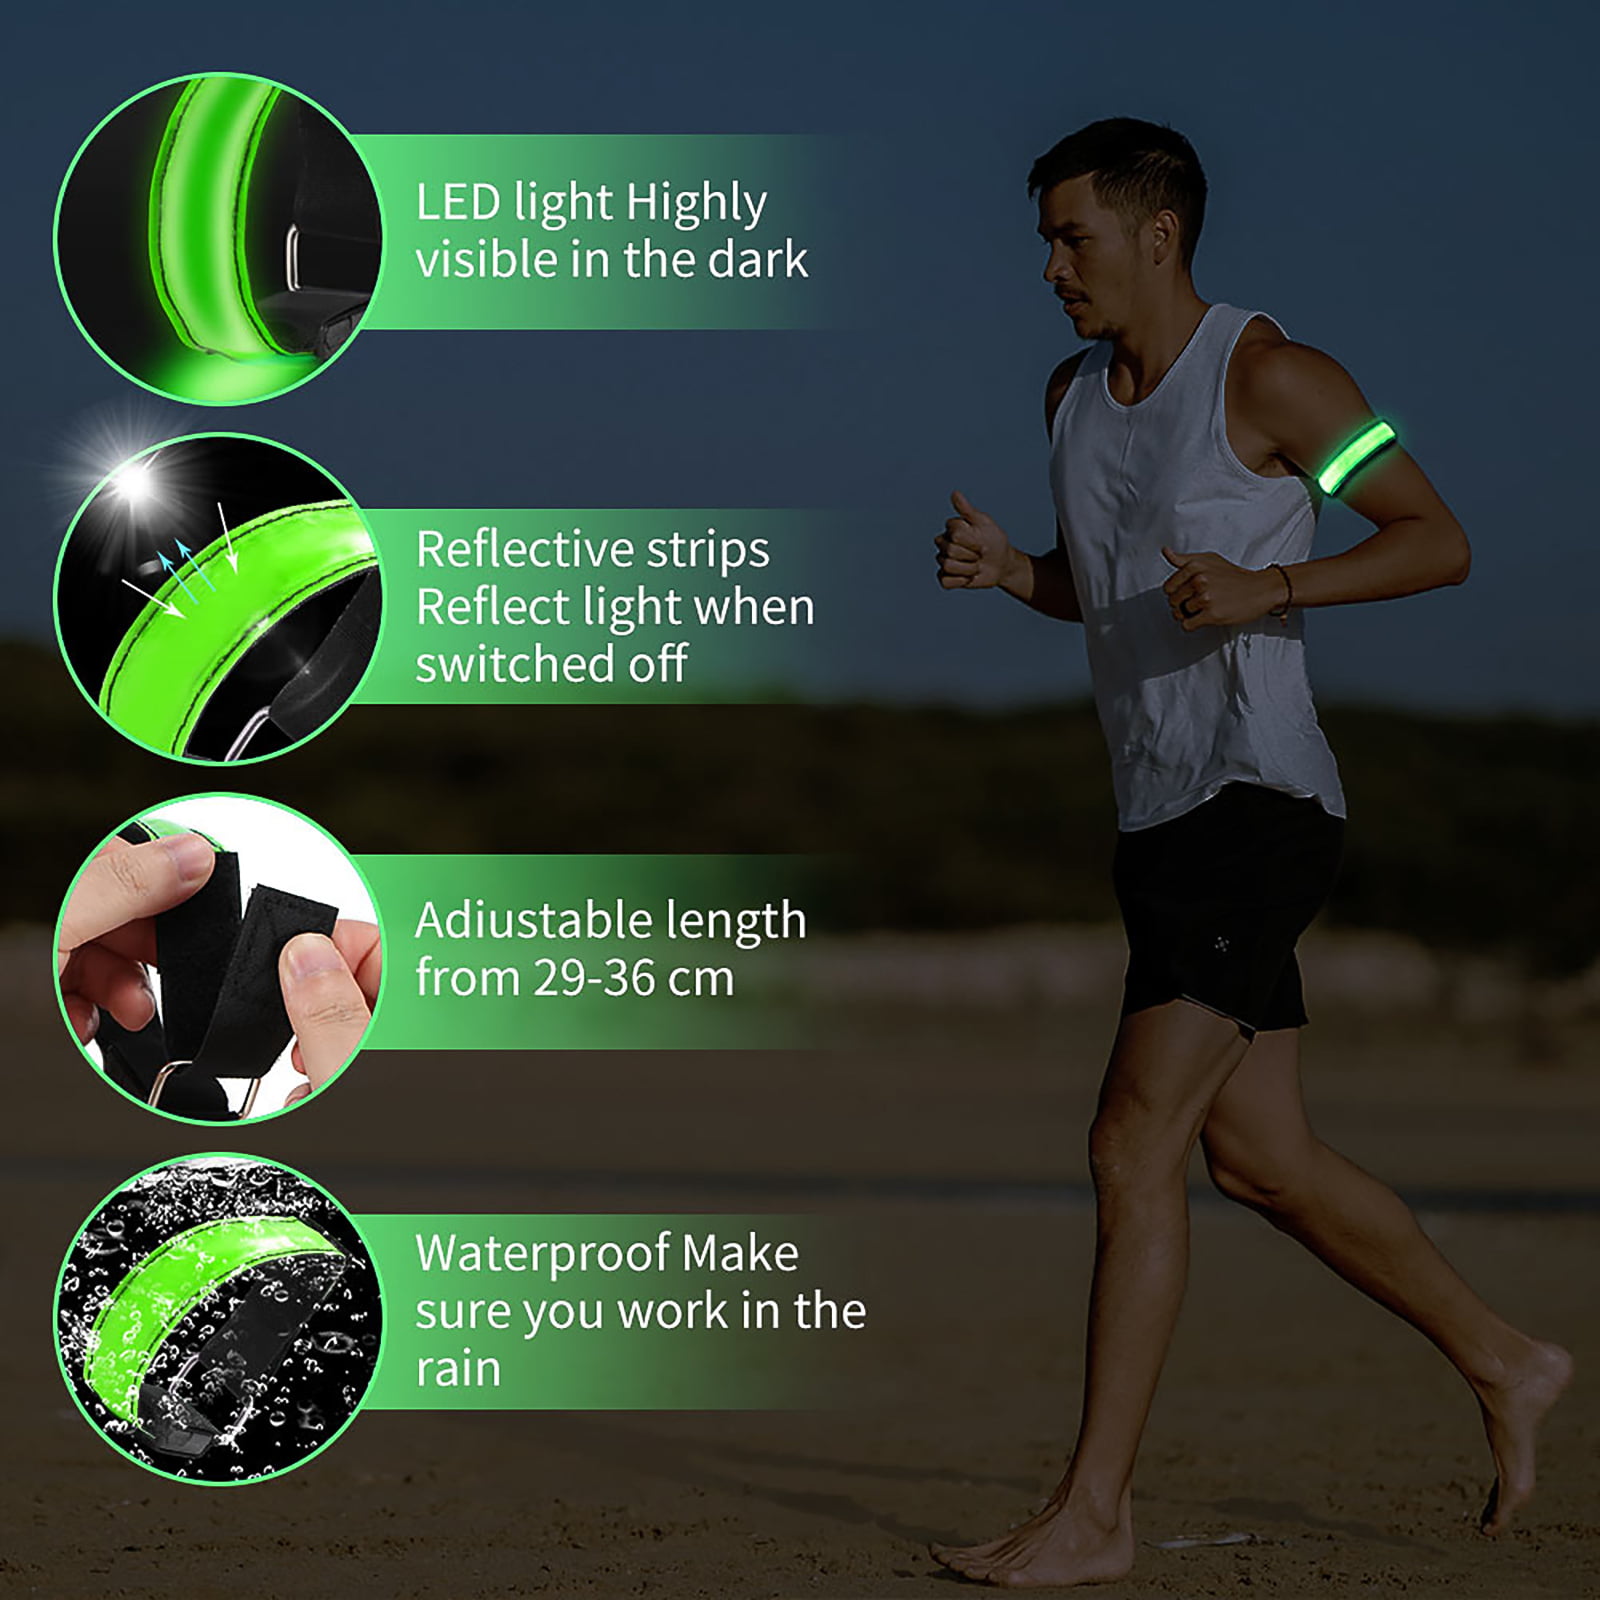 lanpard Rechargeable LED ArmbandHigh Visibility Led Running Lights forGear 